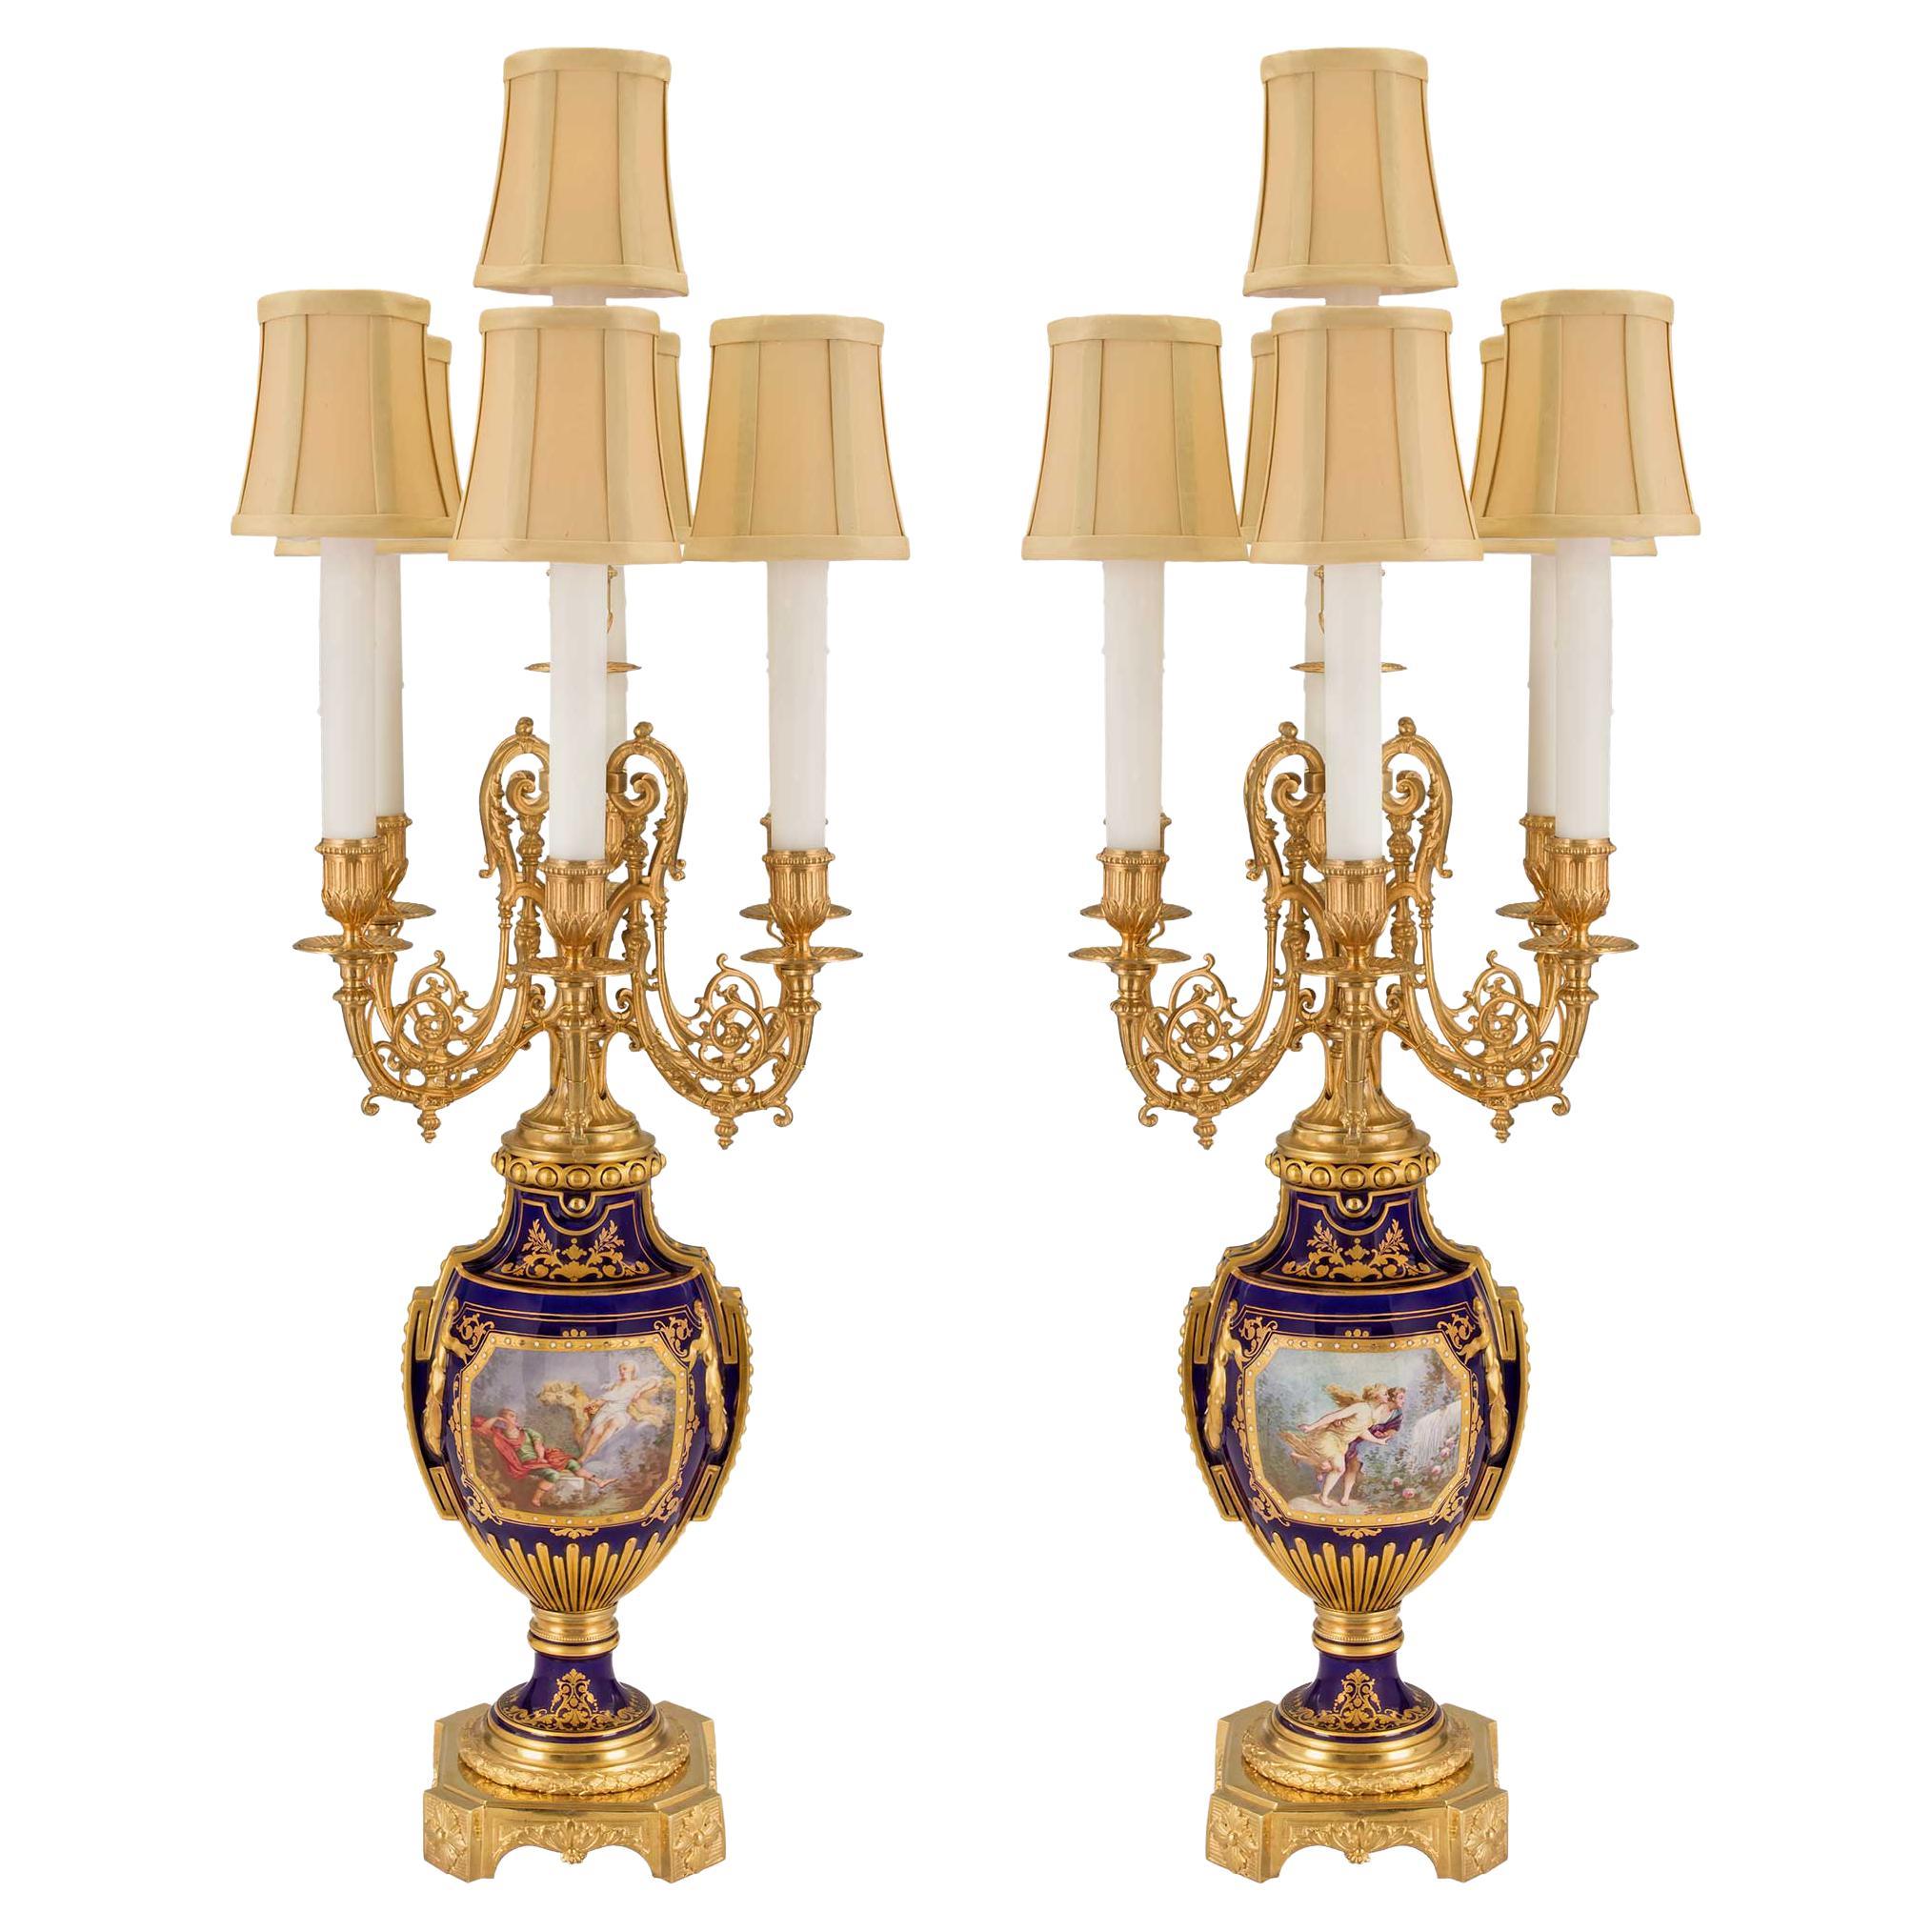 Pair of French 19th Century Louis XVI Sèvres Porcelain and Ormolu Candelabras For Sale